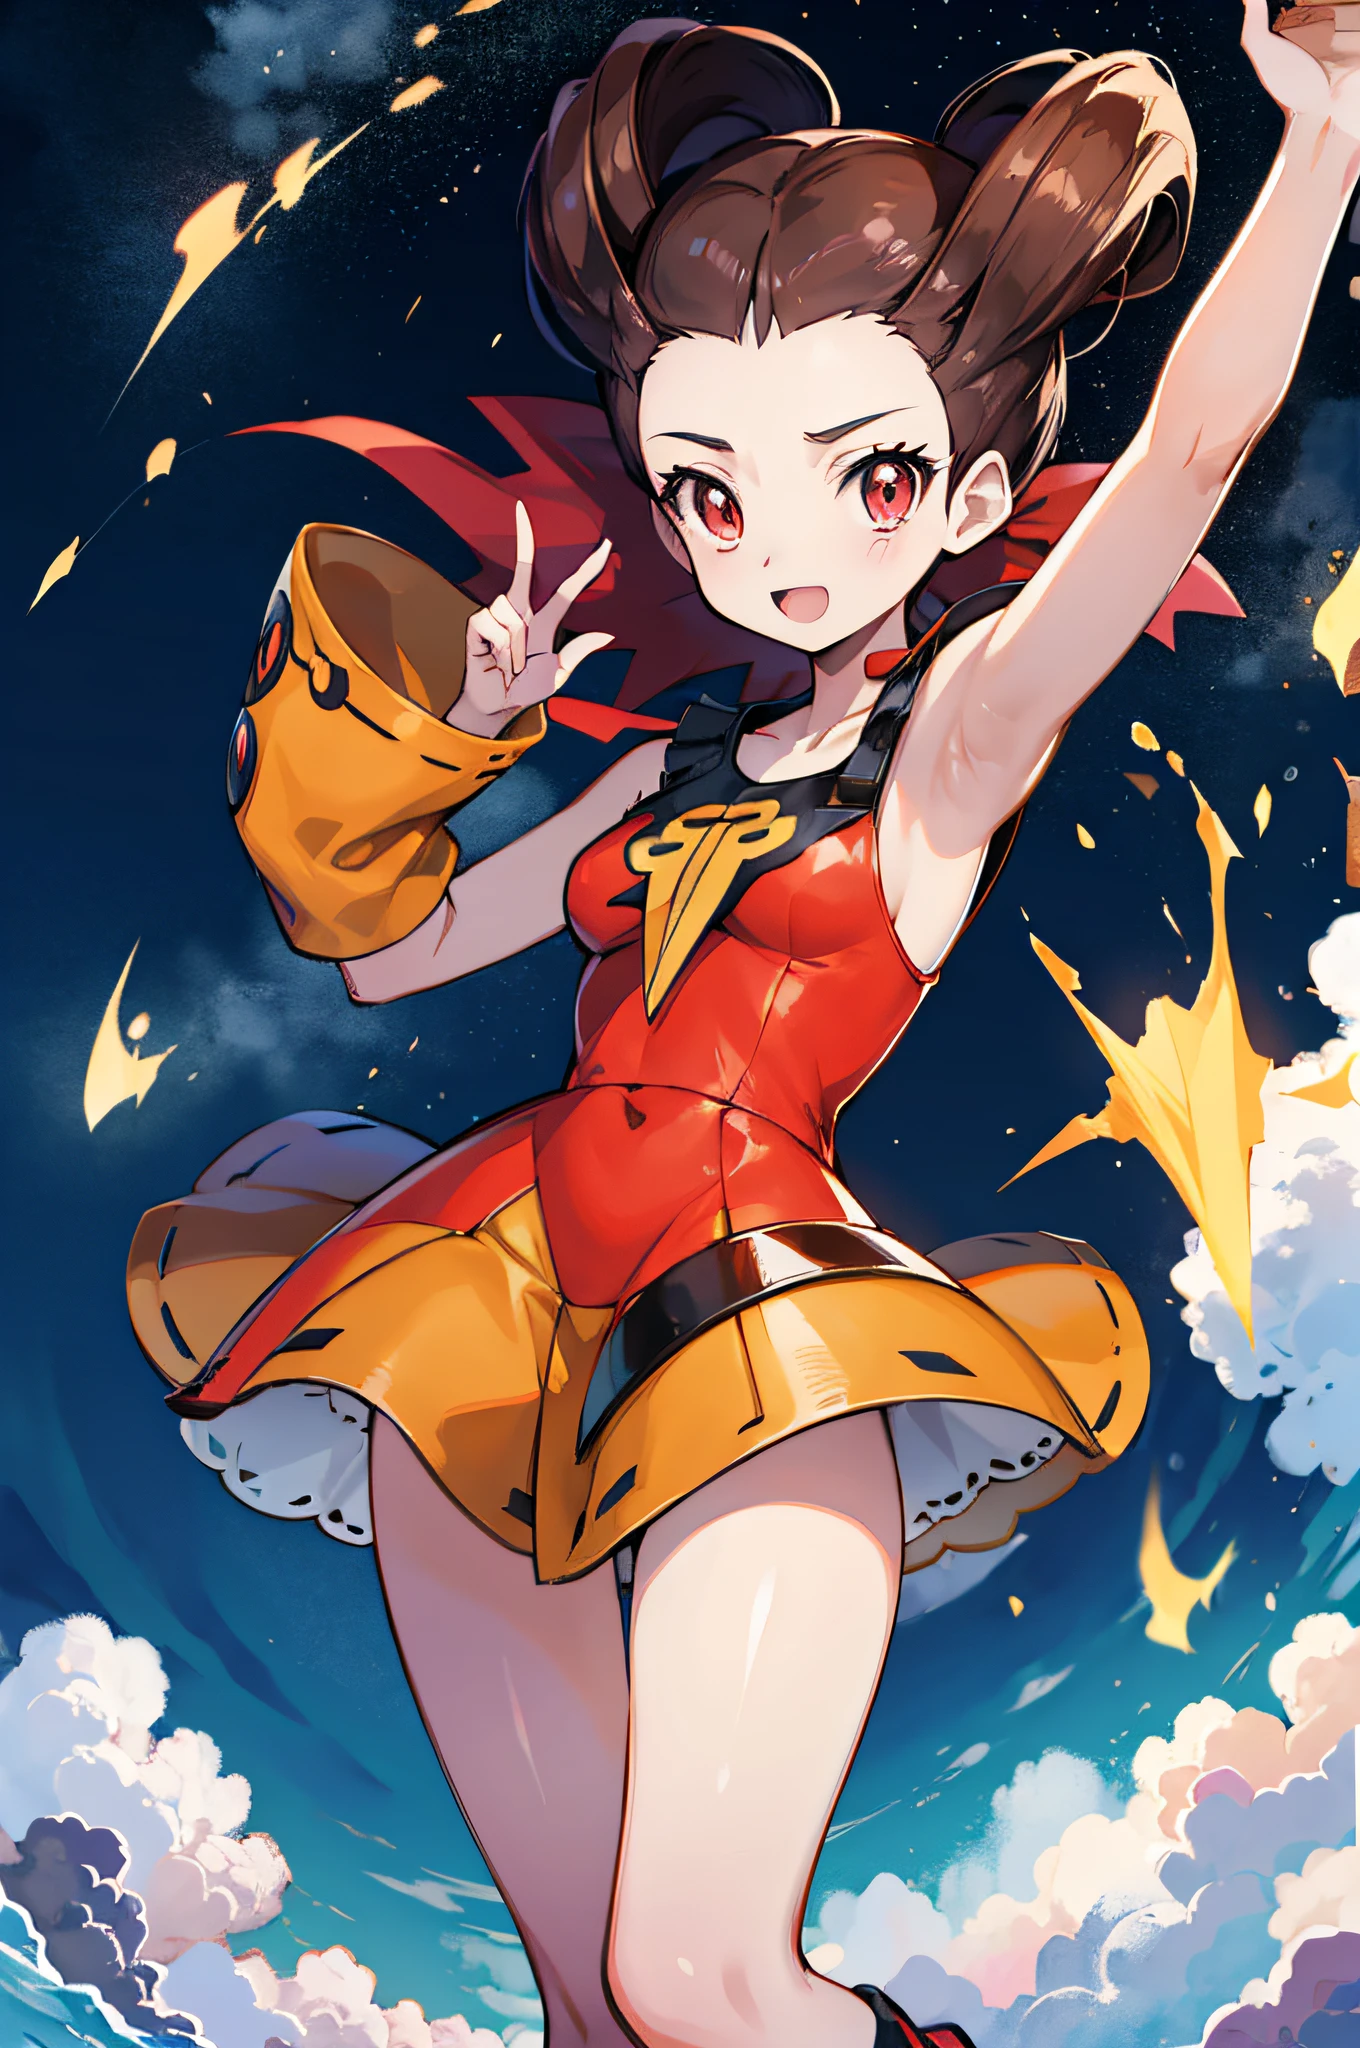 anime styling, The environment filled with fire, Playing with Pokémon , roxanne( charachter) is in a standard outfit, long hair, cor parda, orange eyes, Grinning, ultrarealistic, fully body, 2d